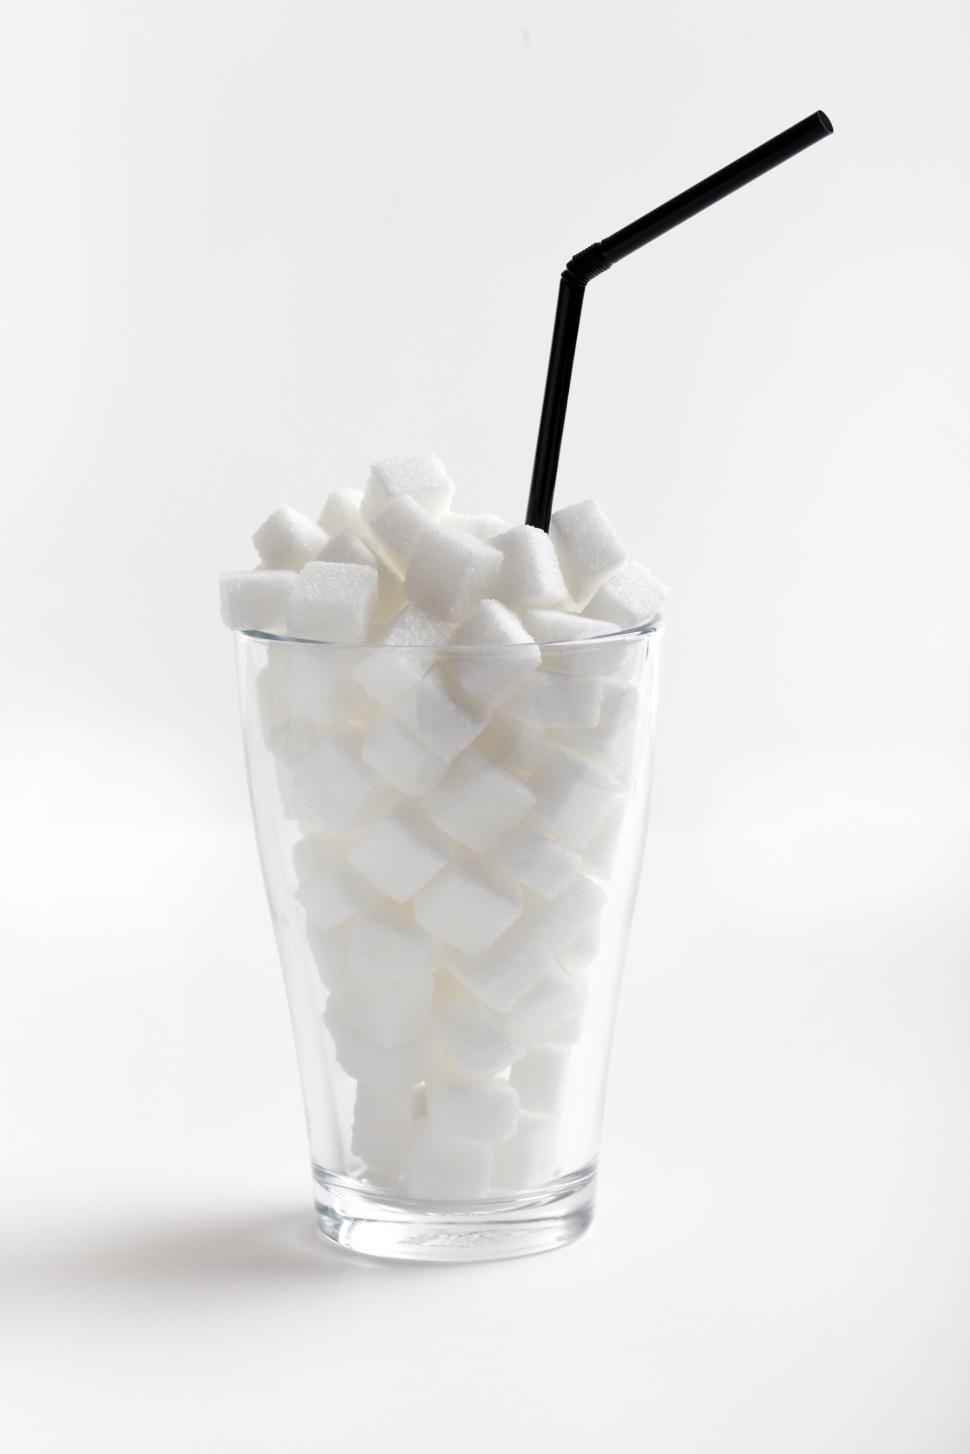 Free Image of Sugar cubes in a glass - sugared drink concept 